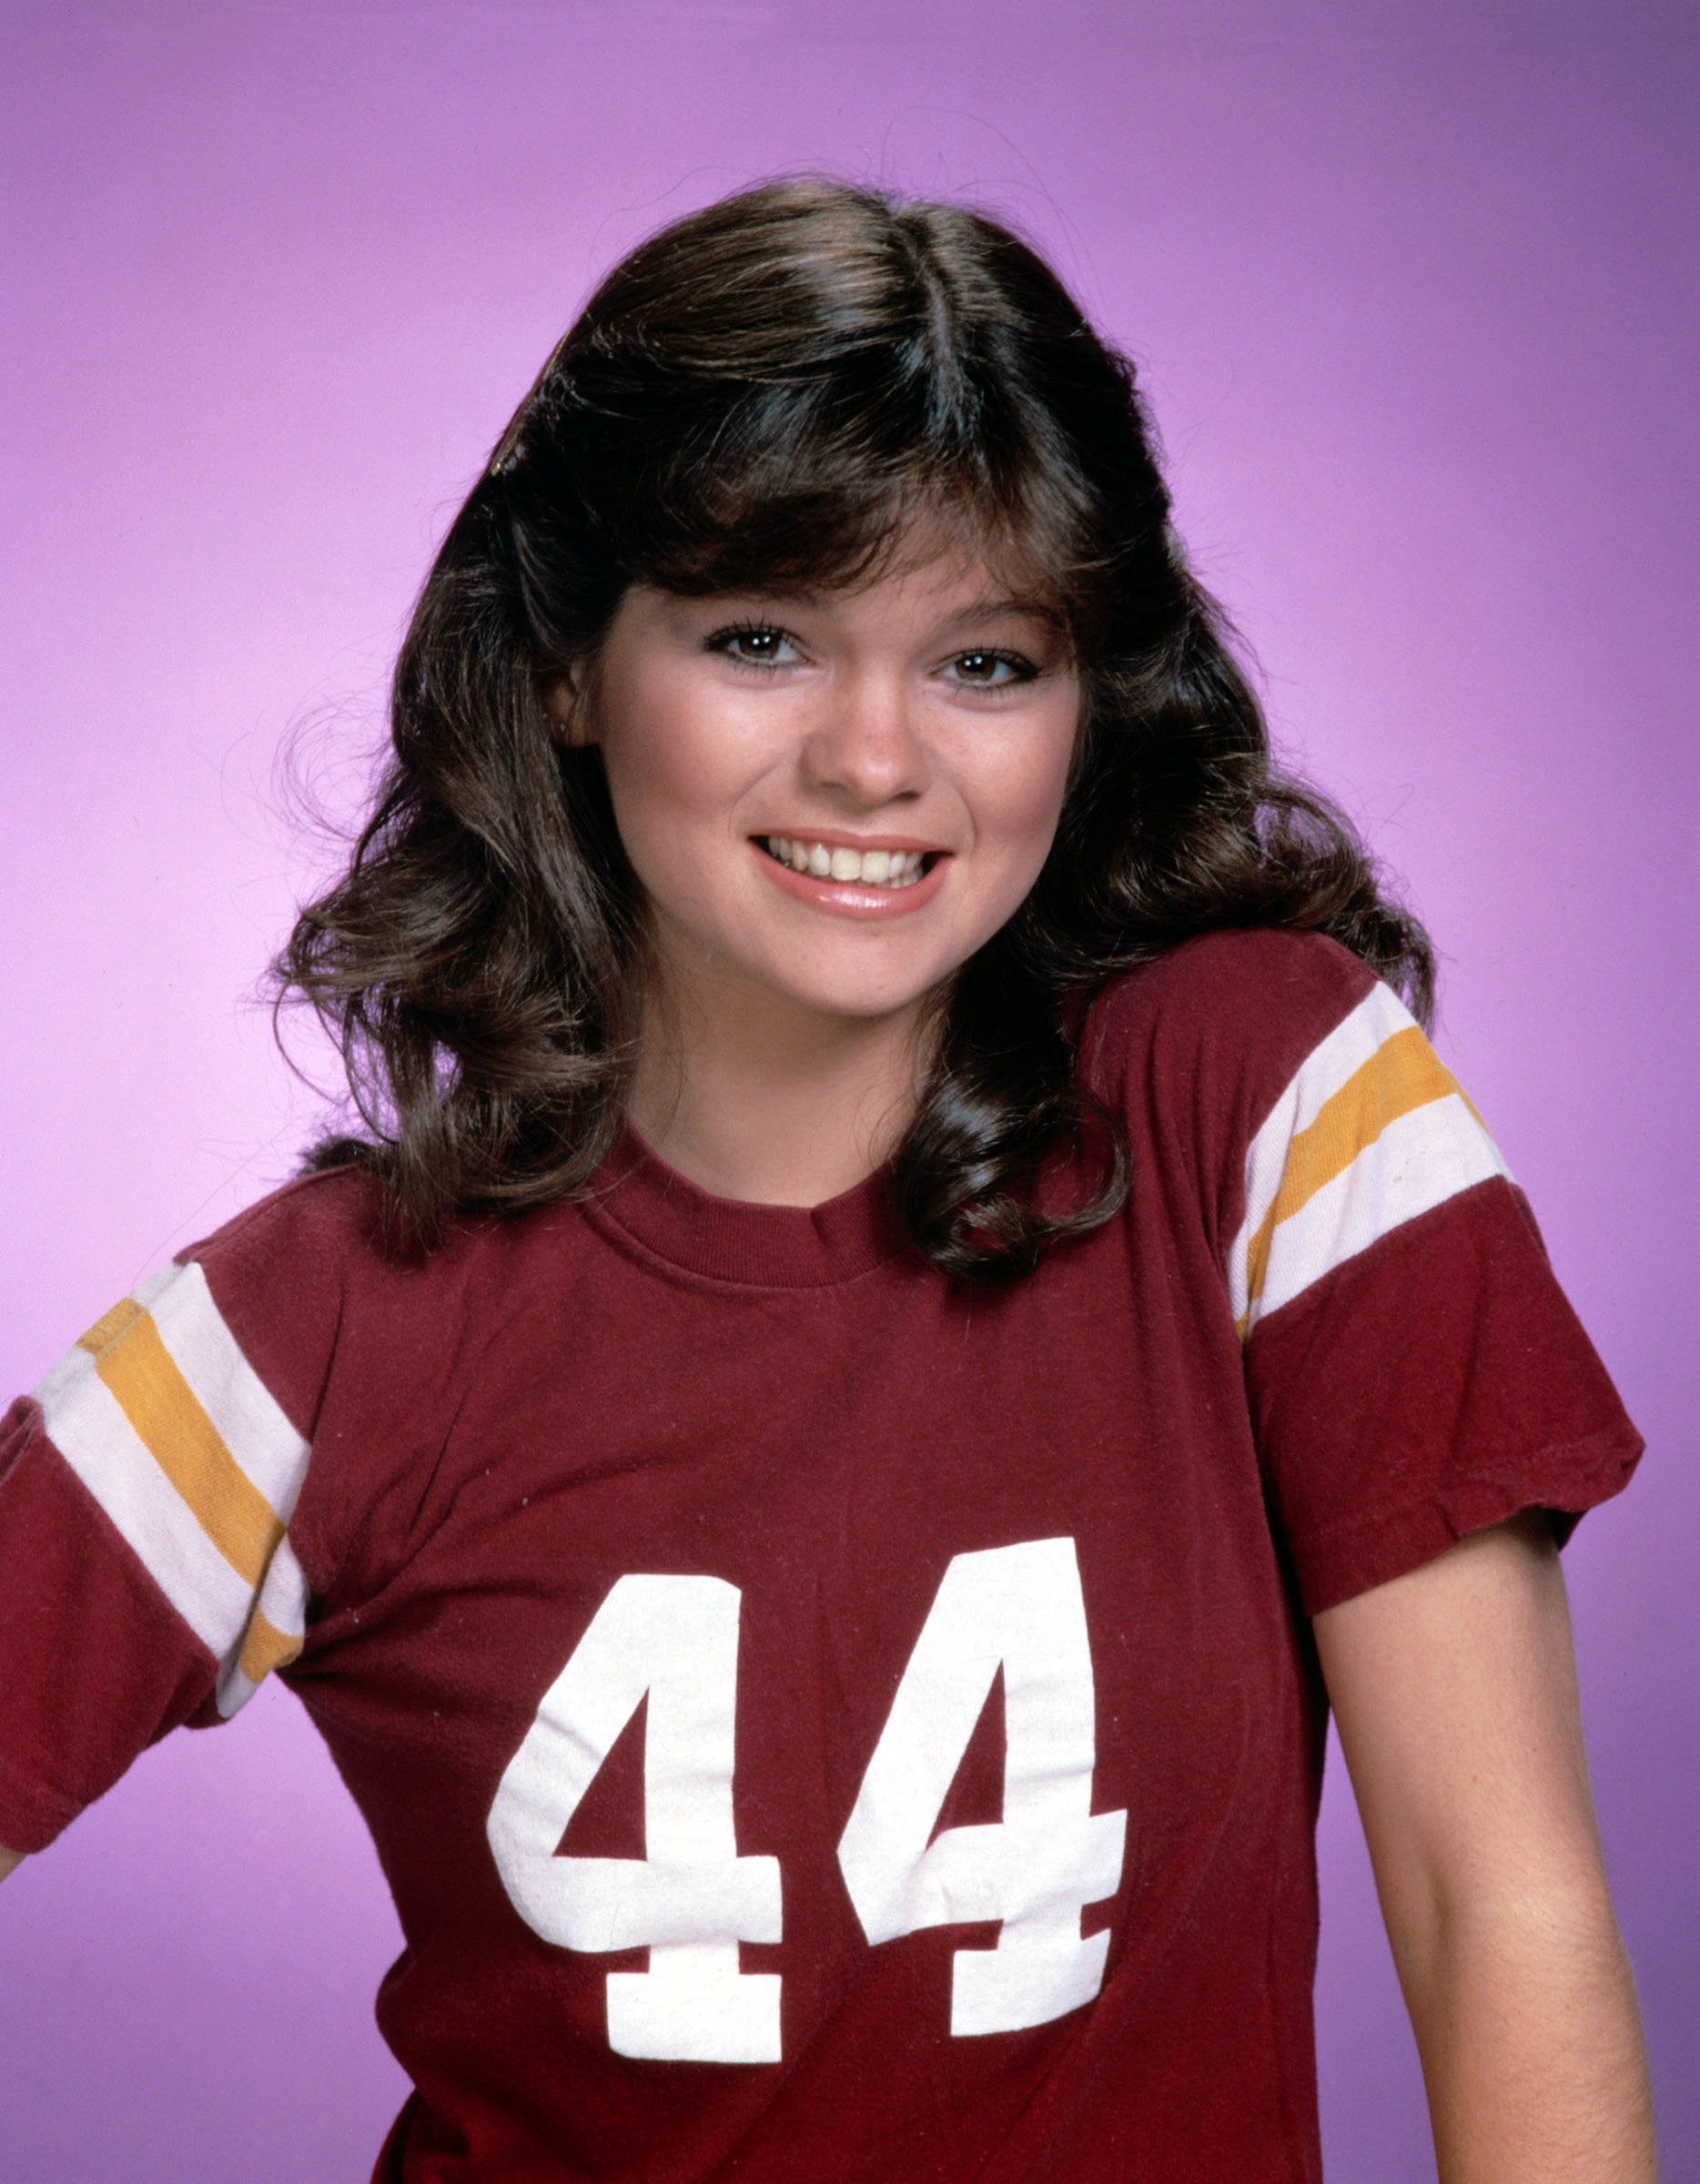 Former 'One Day at a Time' star Valerie Bertinelli